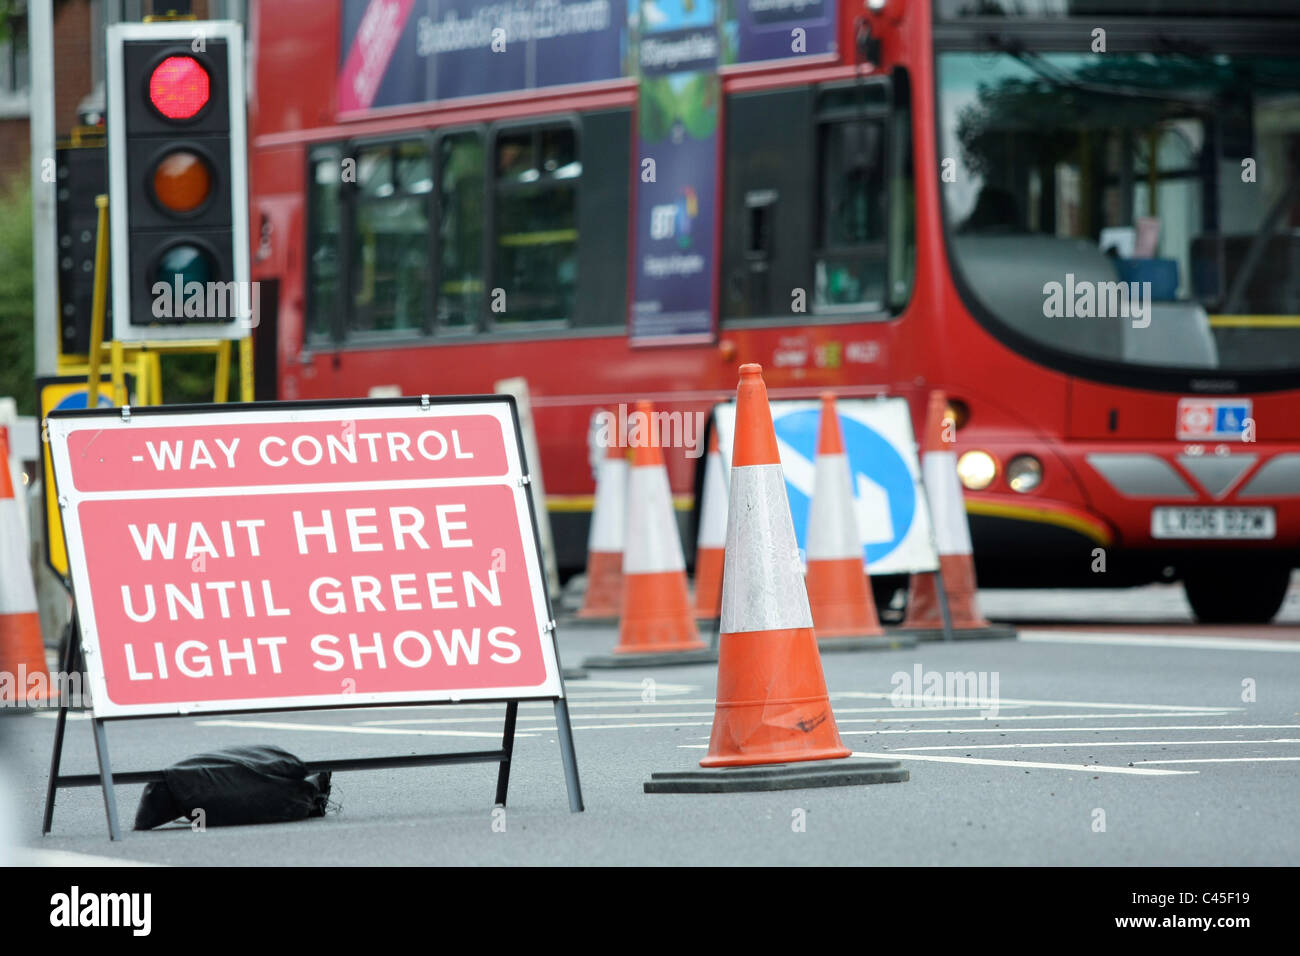 A bus traveling through roadworks controlled by a temporary set of traffic lights Stock Photo